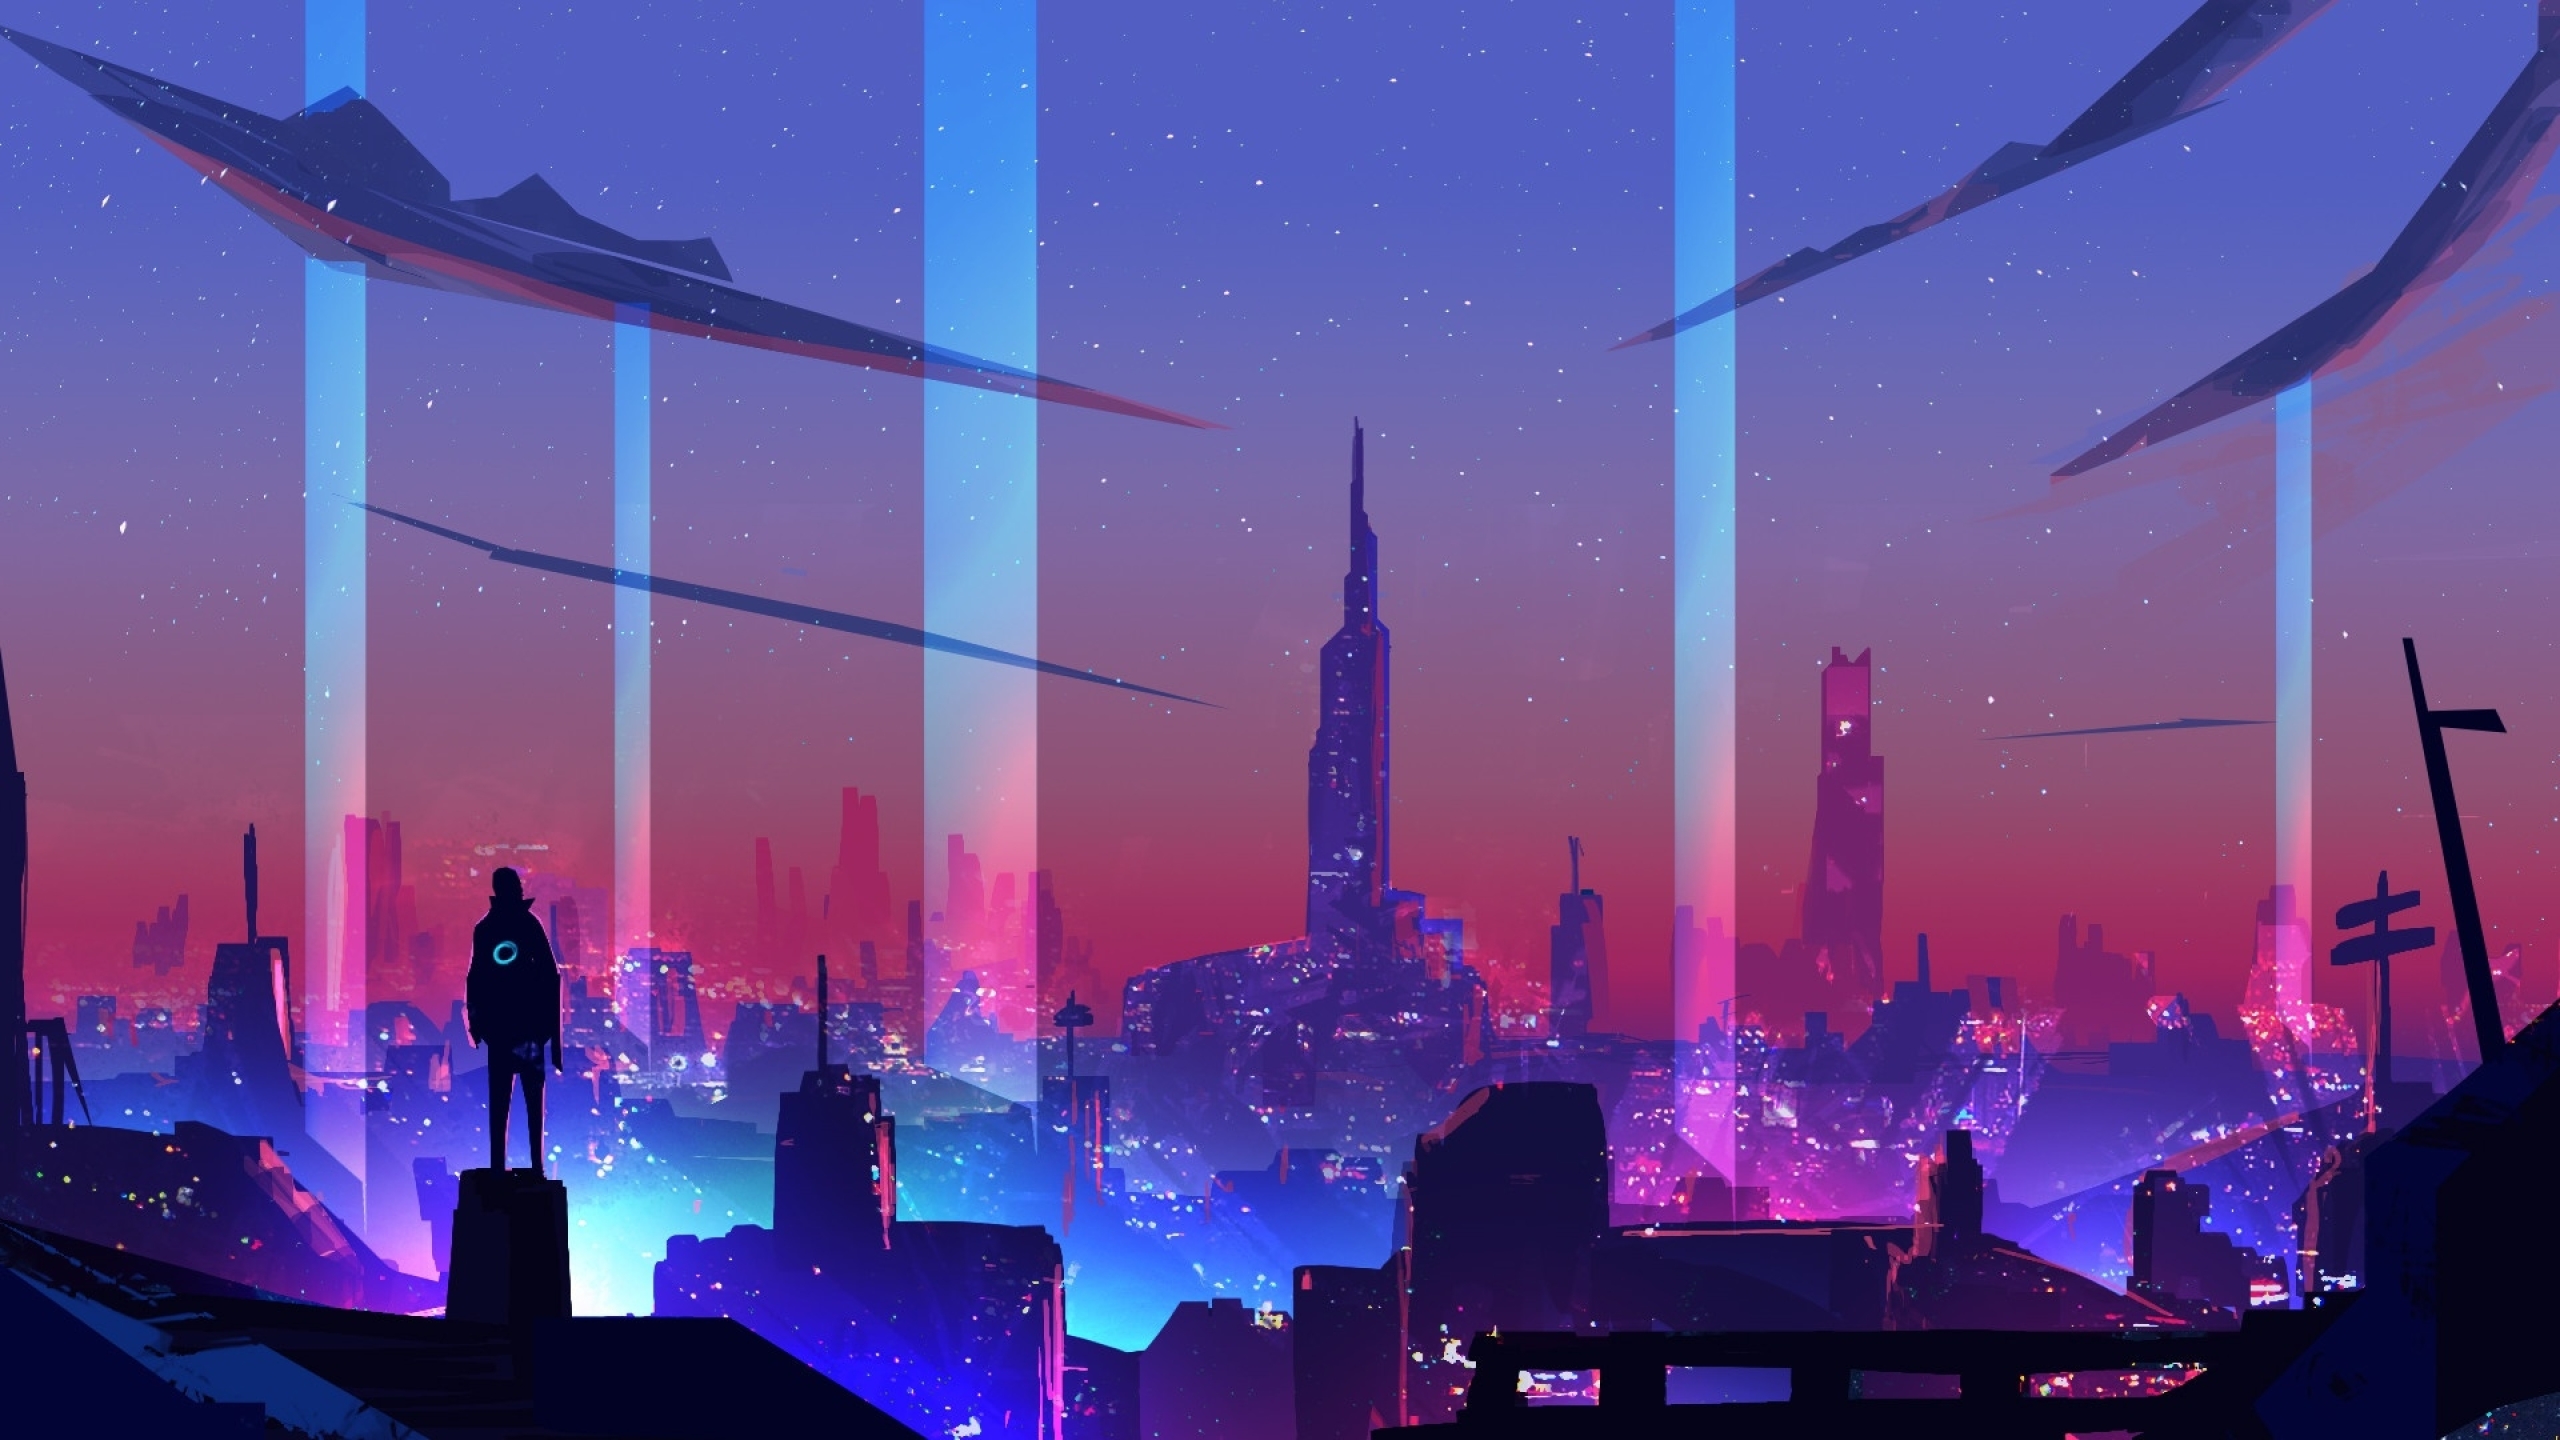 2560x1440 Neon Wave Futuristic City 1440p Resolution Wallpaper Hd Artist 4k Wallpapers Images Photos And Background Wallpapers Den